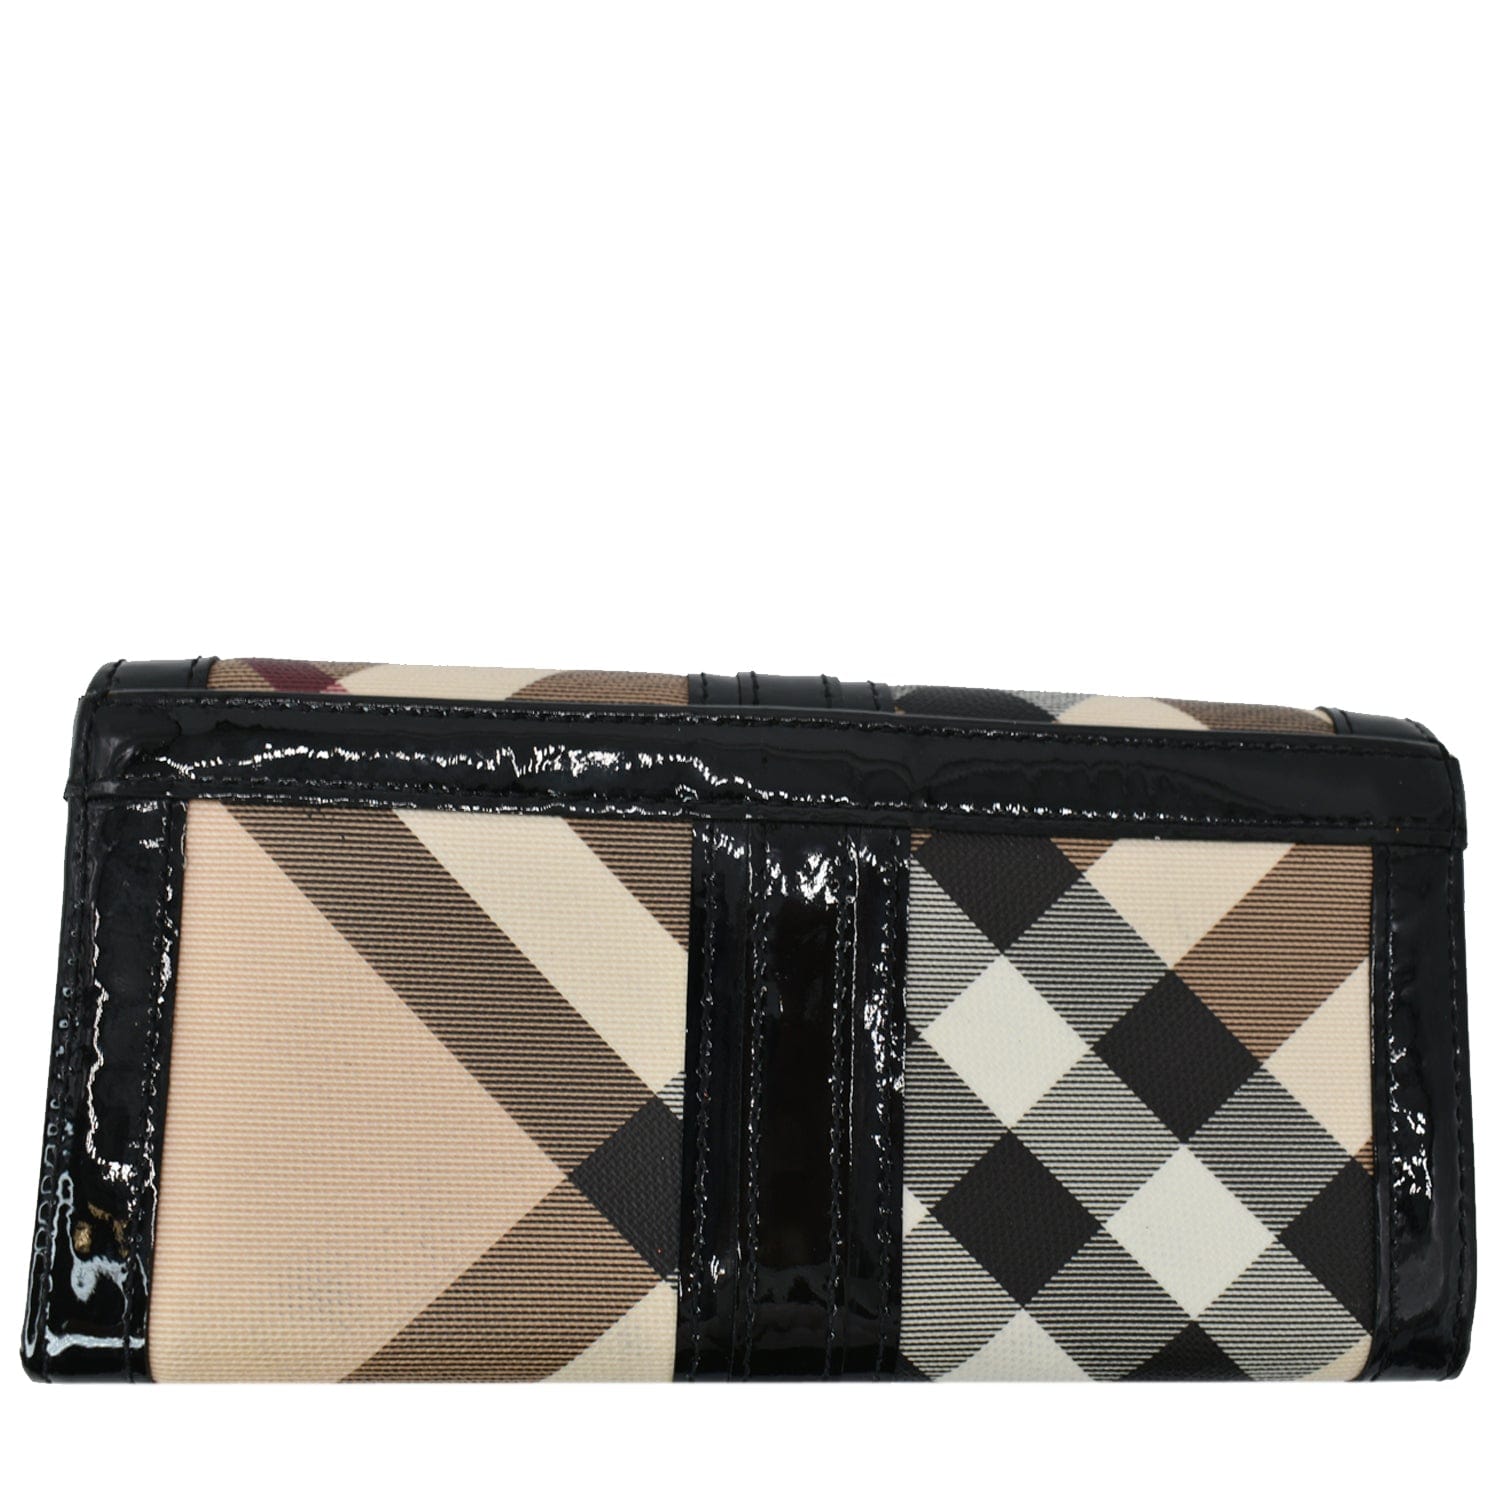 Burberry Nova Check and Patent Wallet